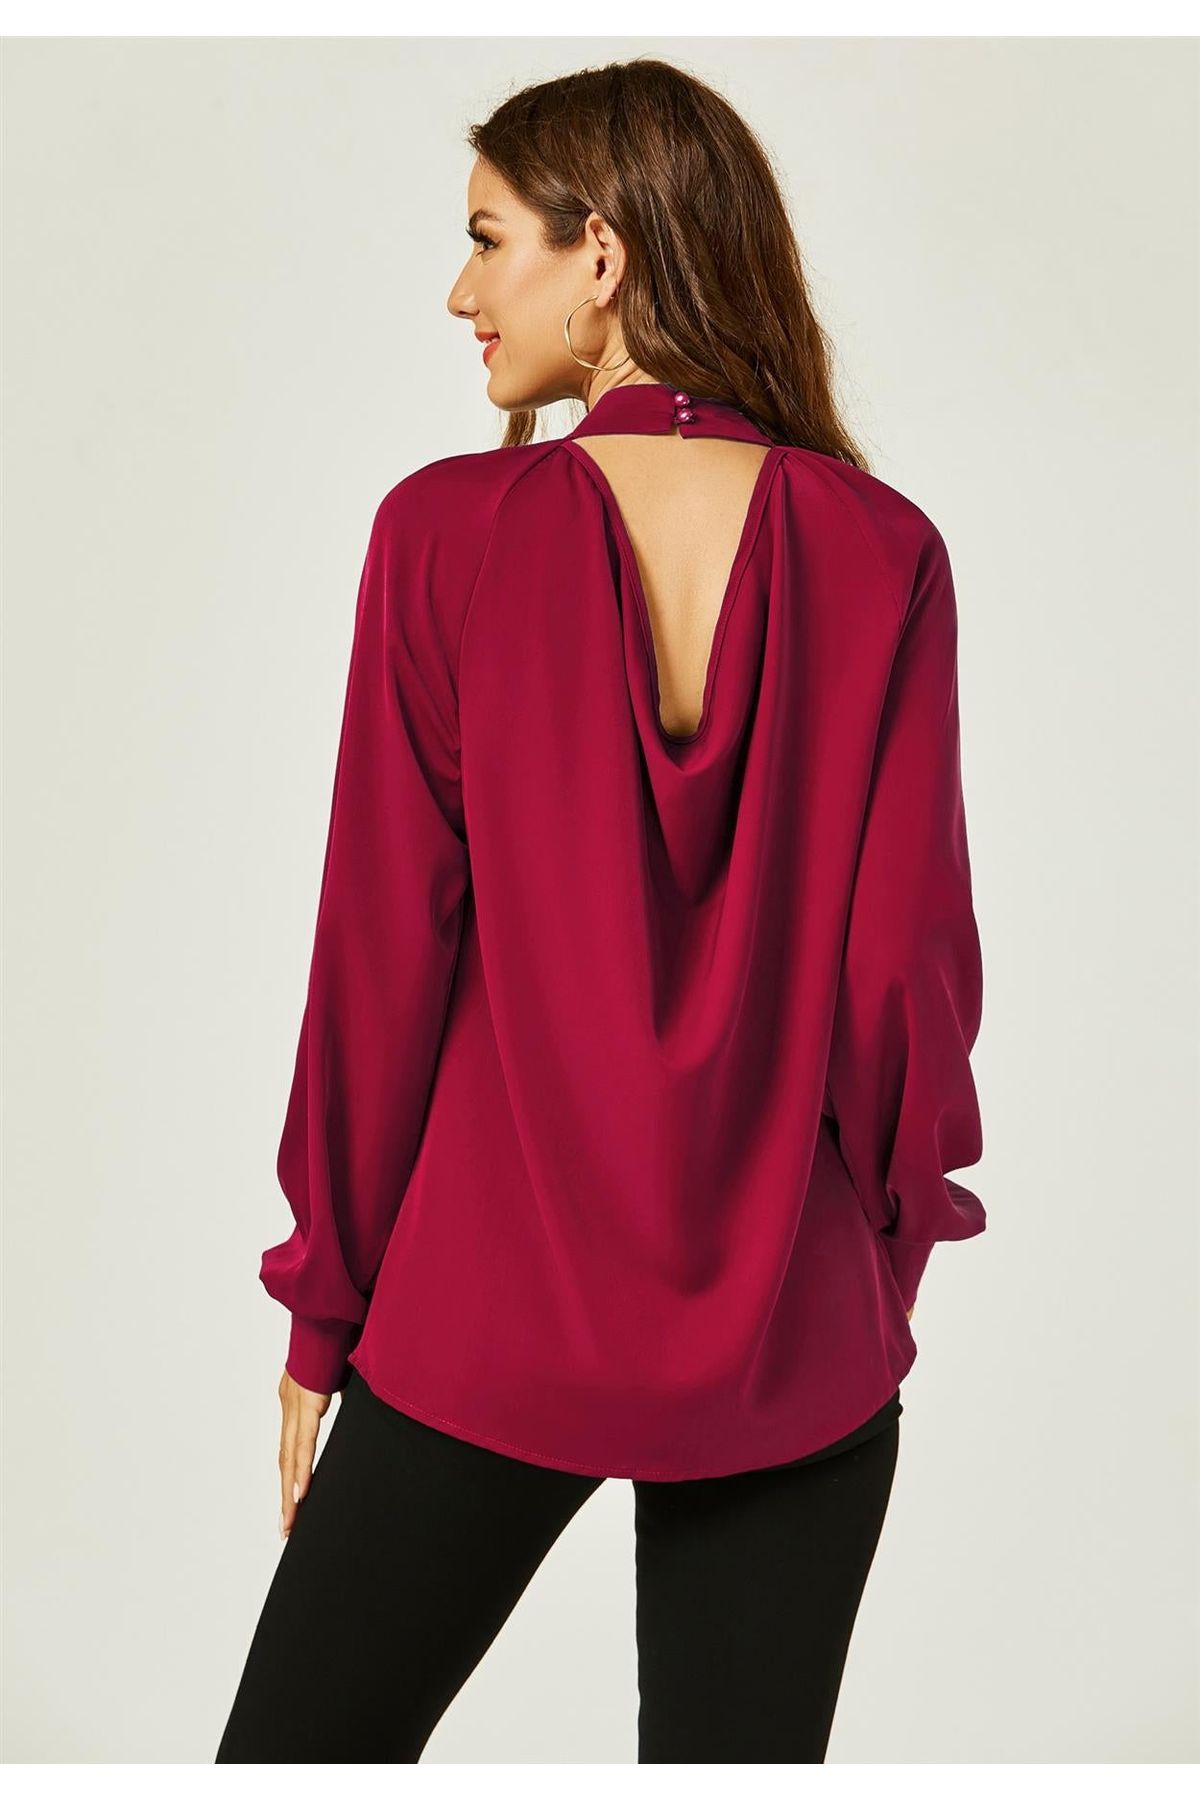 Halter Neck Long Sleeve Blouse Top In Wine Red FS487